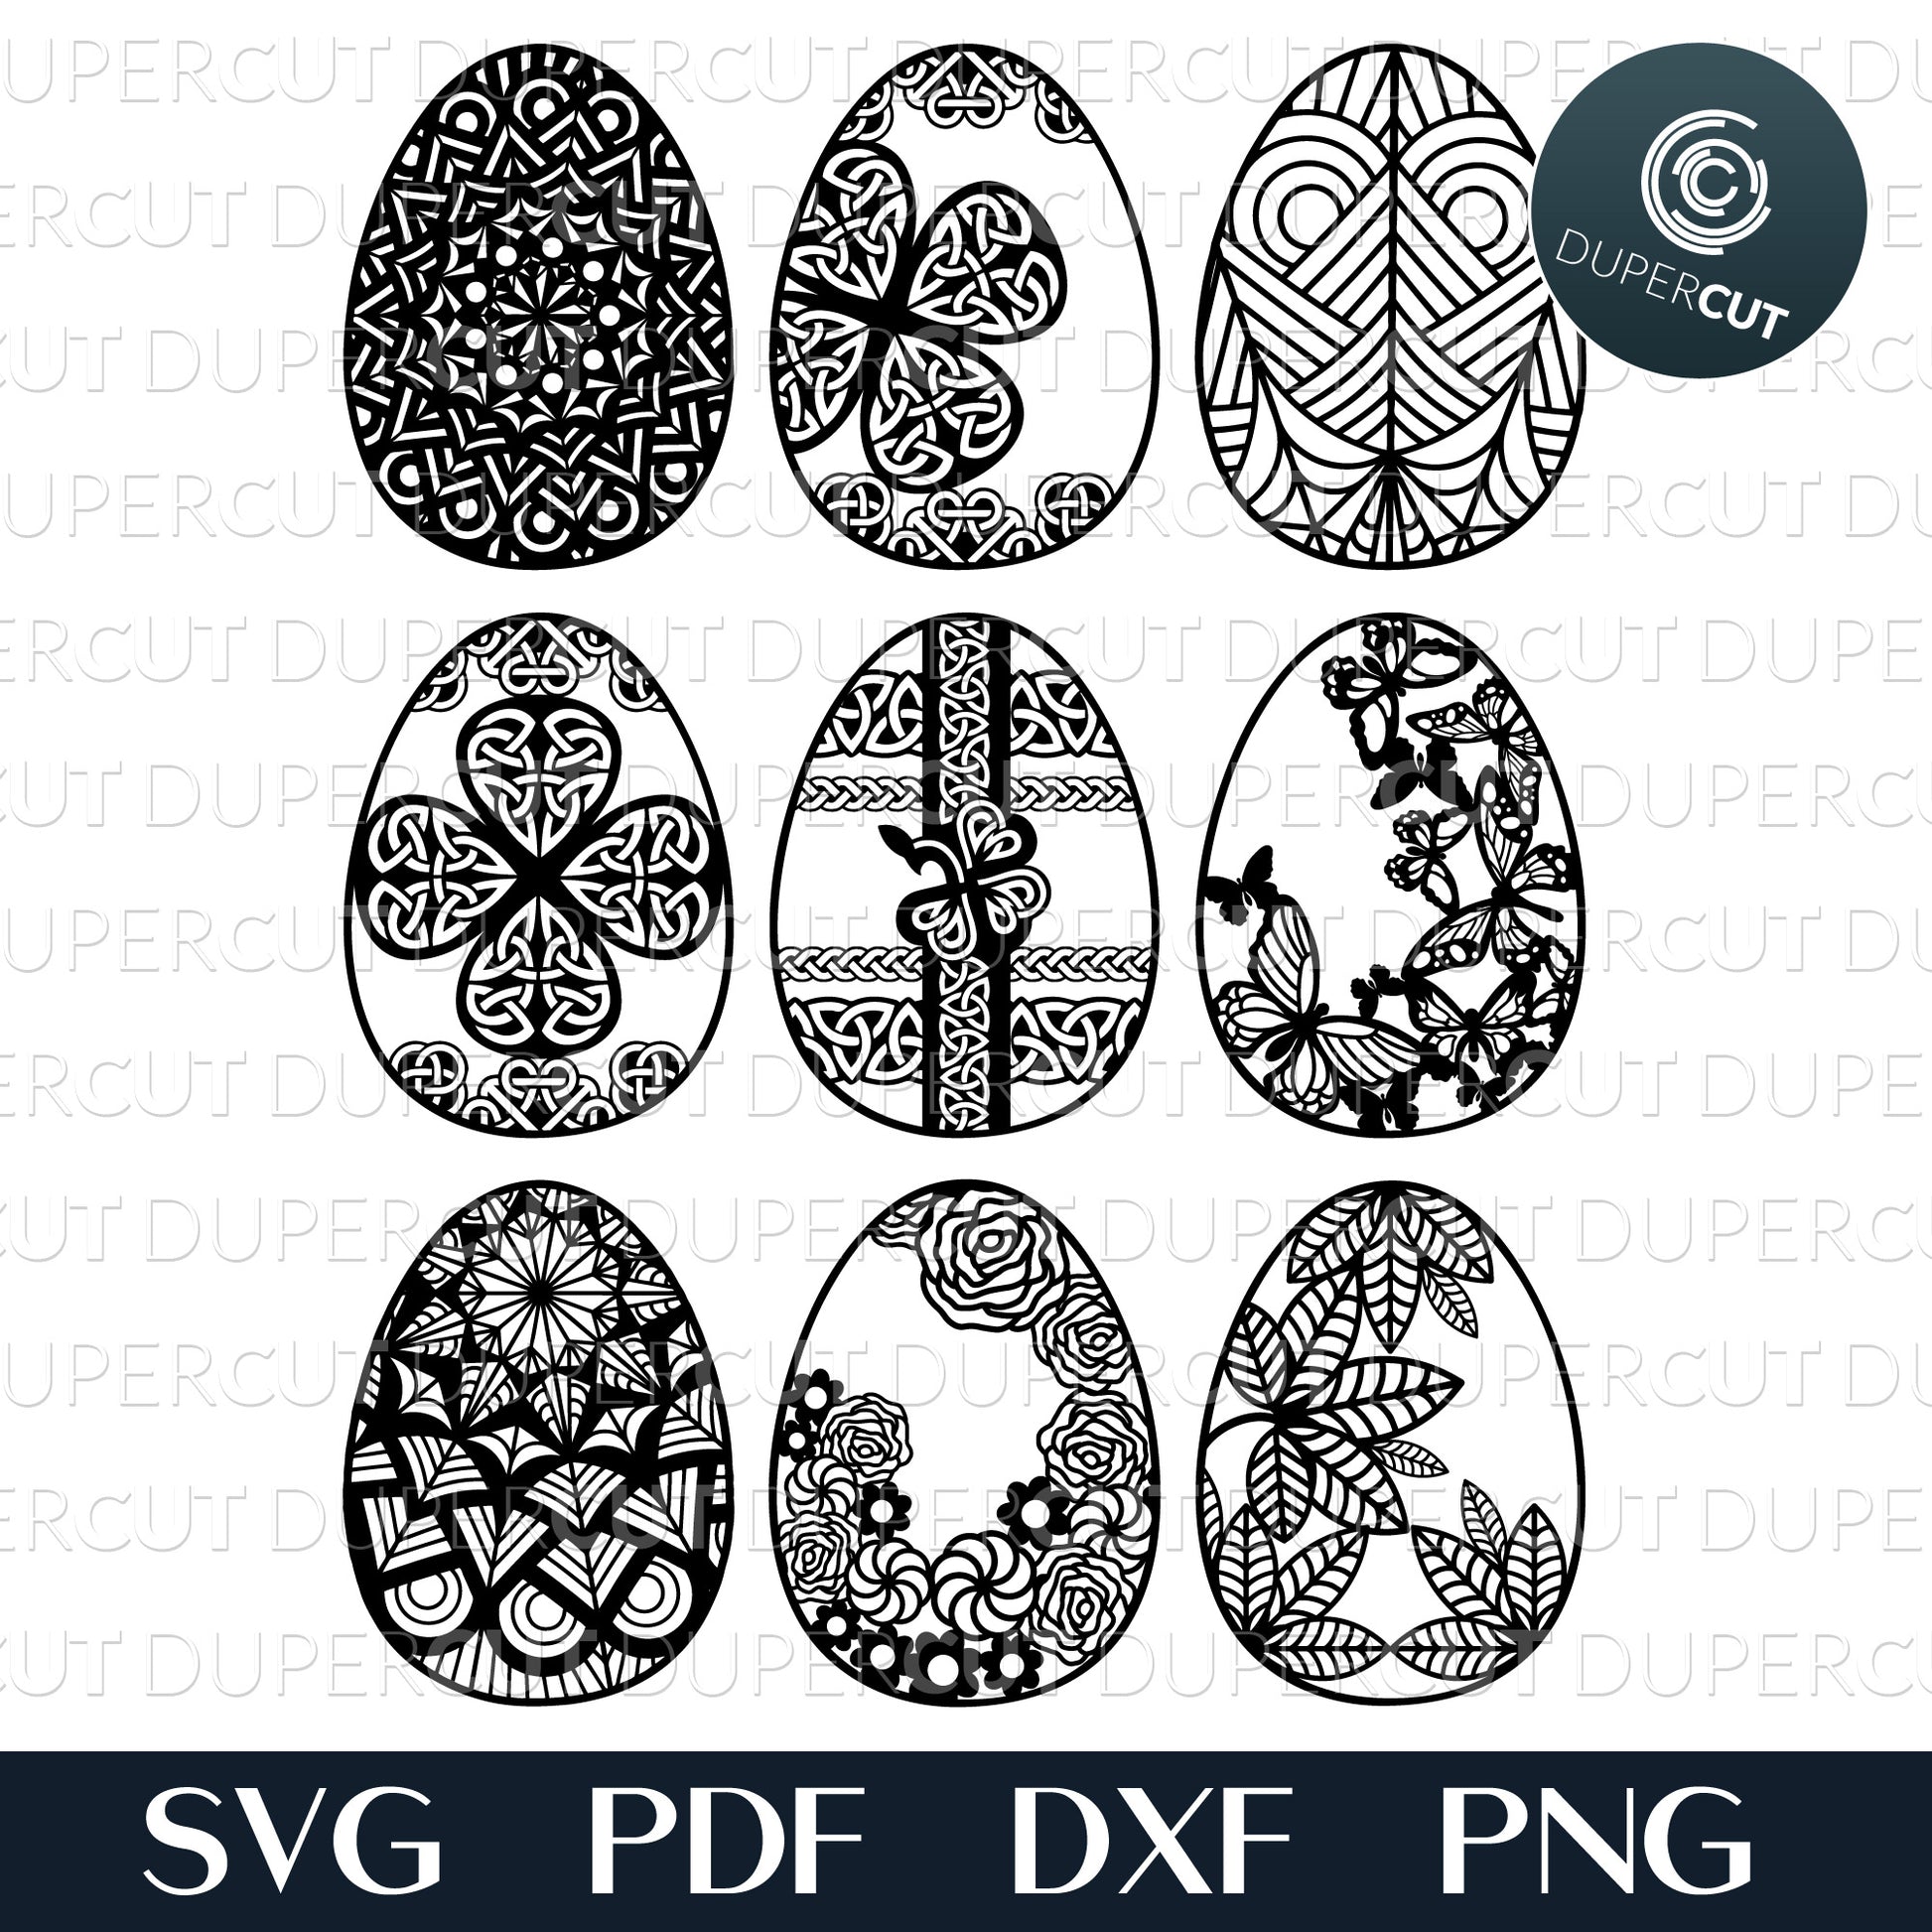 Easter eggs pysanka template collection  - SVG DXF PNG vector files for laser and CNC machines, Cricut, Silhouette Cameo, Glowforge projects. 